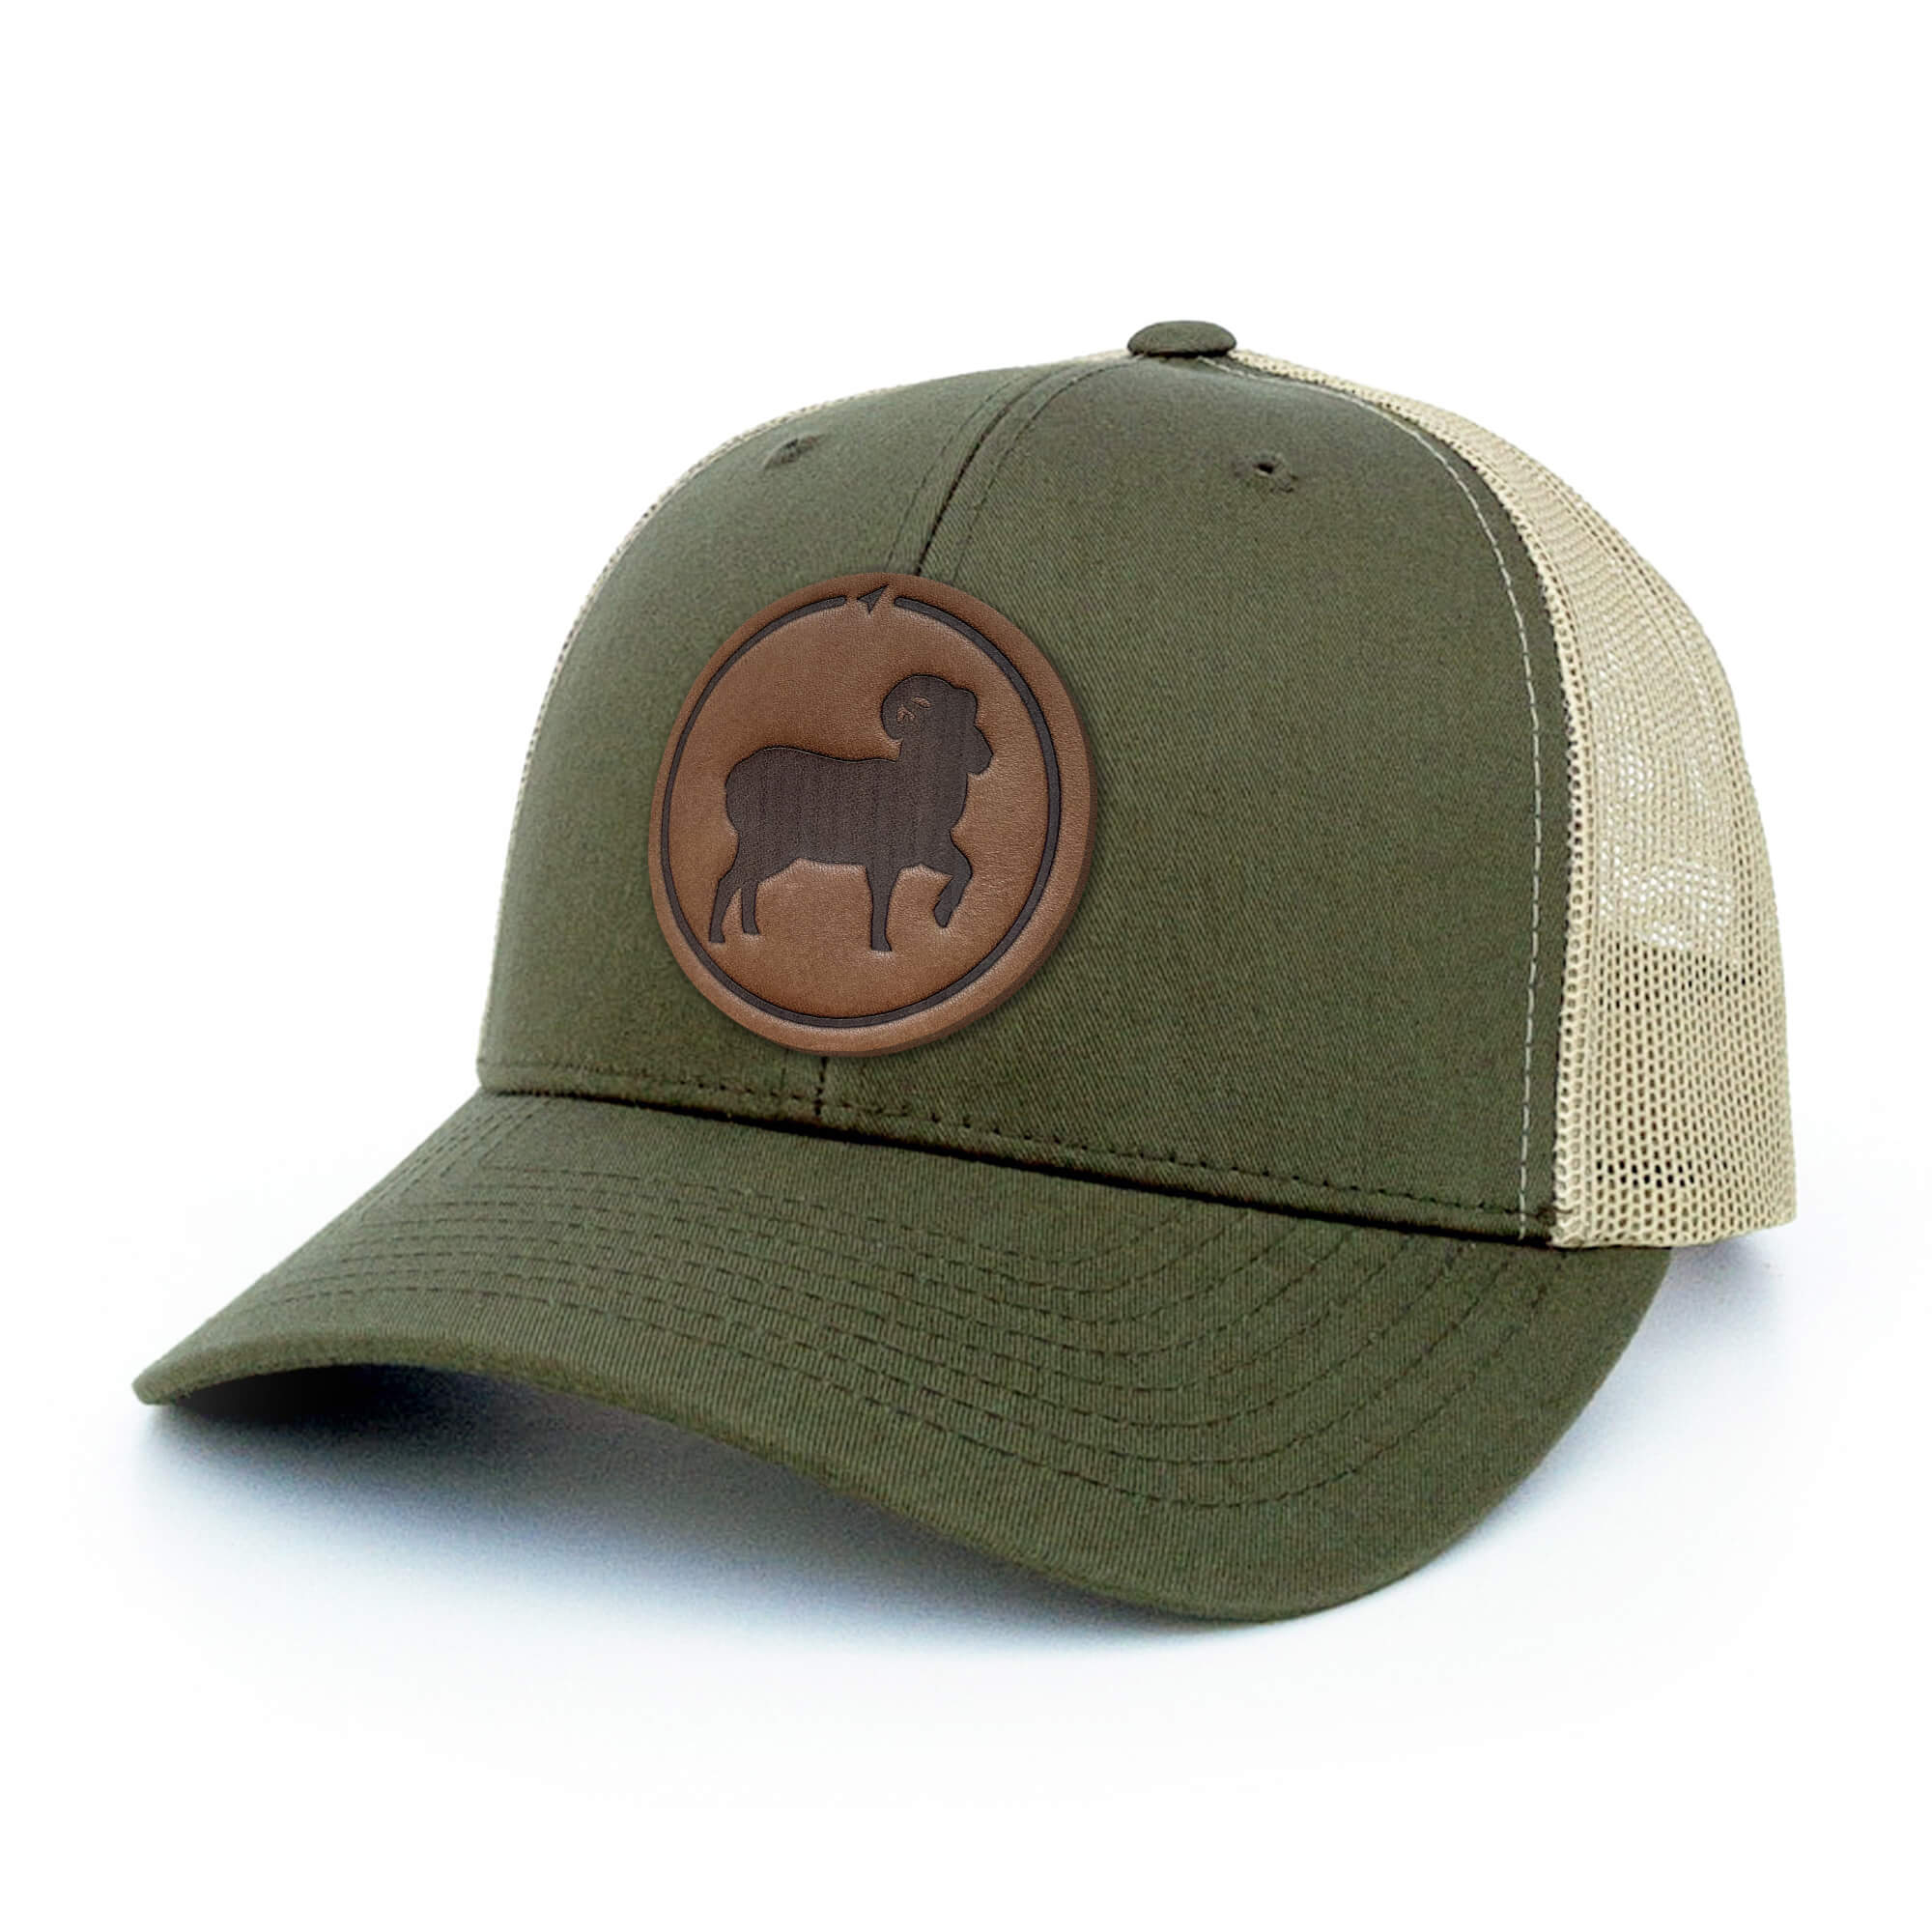 Moss and khaki trucker hat with full-grain leather patch of a Bighorn Sheep | BLACK-004-002, CHARC-004-002, NAVY-004-002, HGREY-004-002, MOSS-004-002, BROWN-004-002